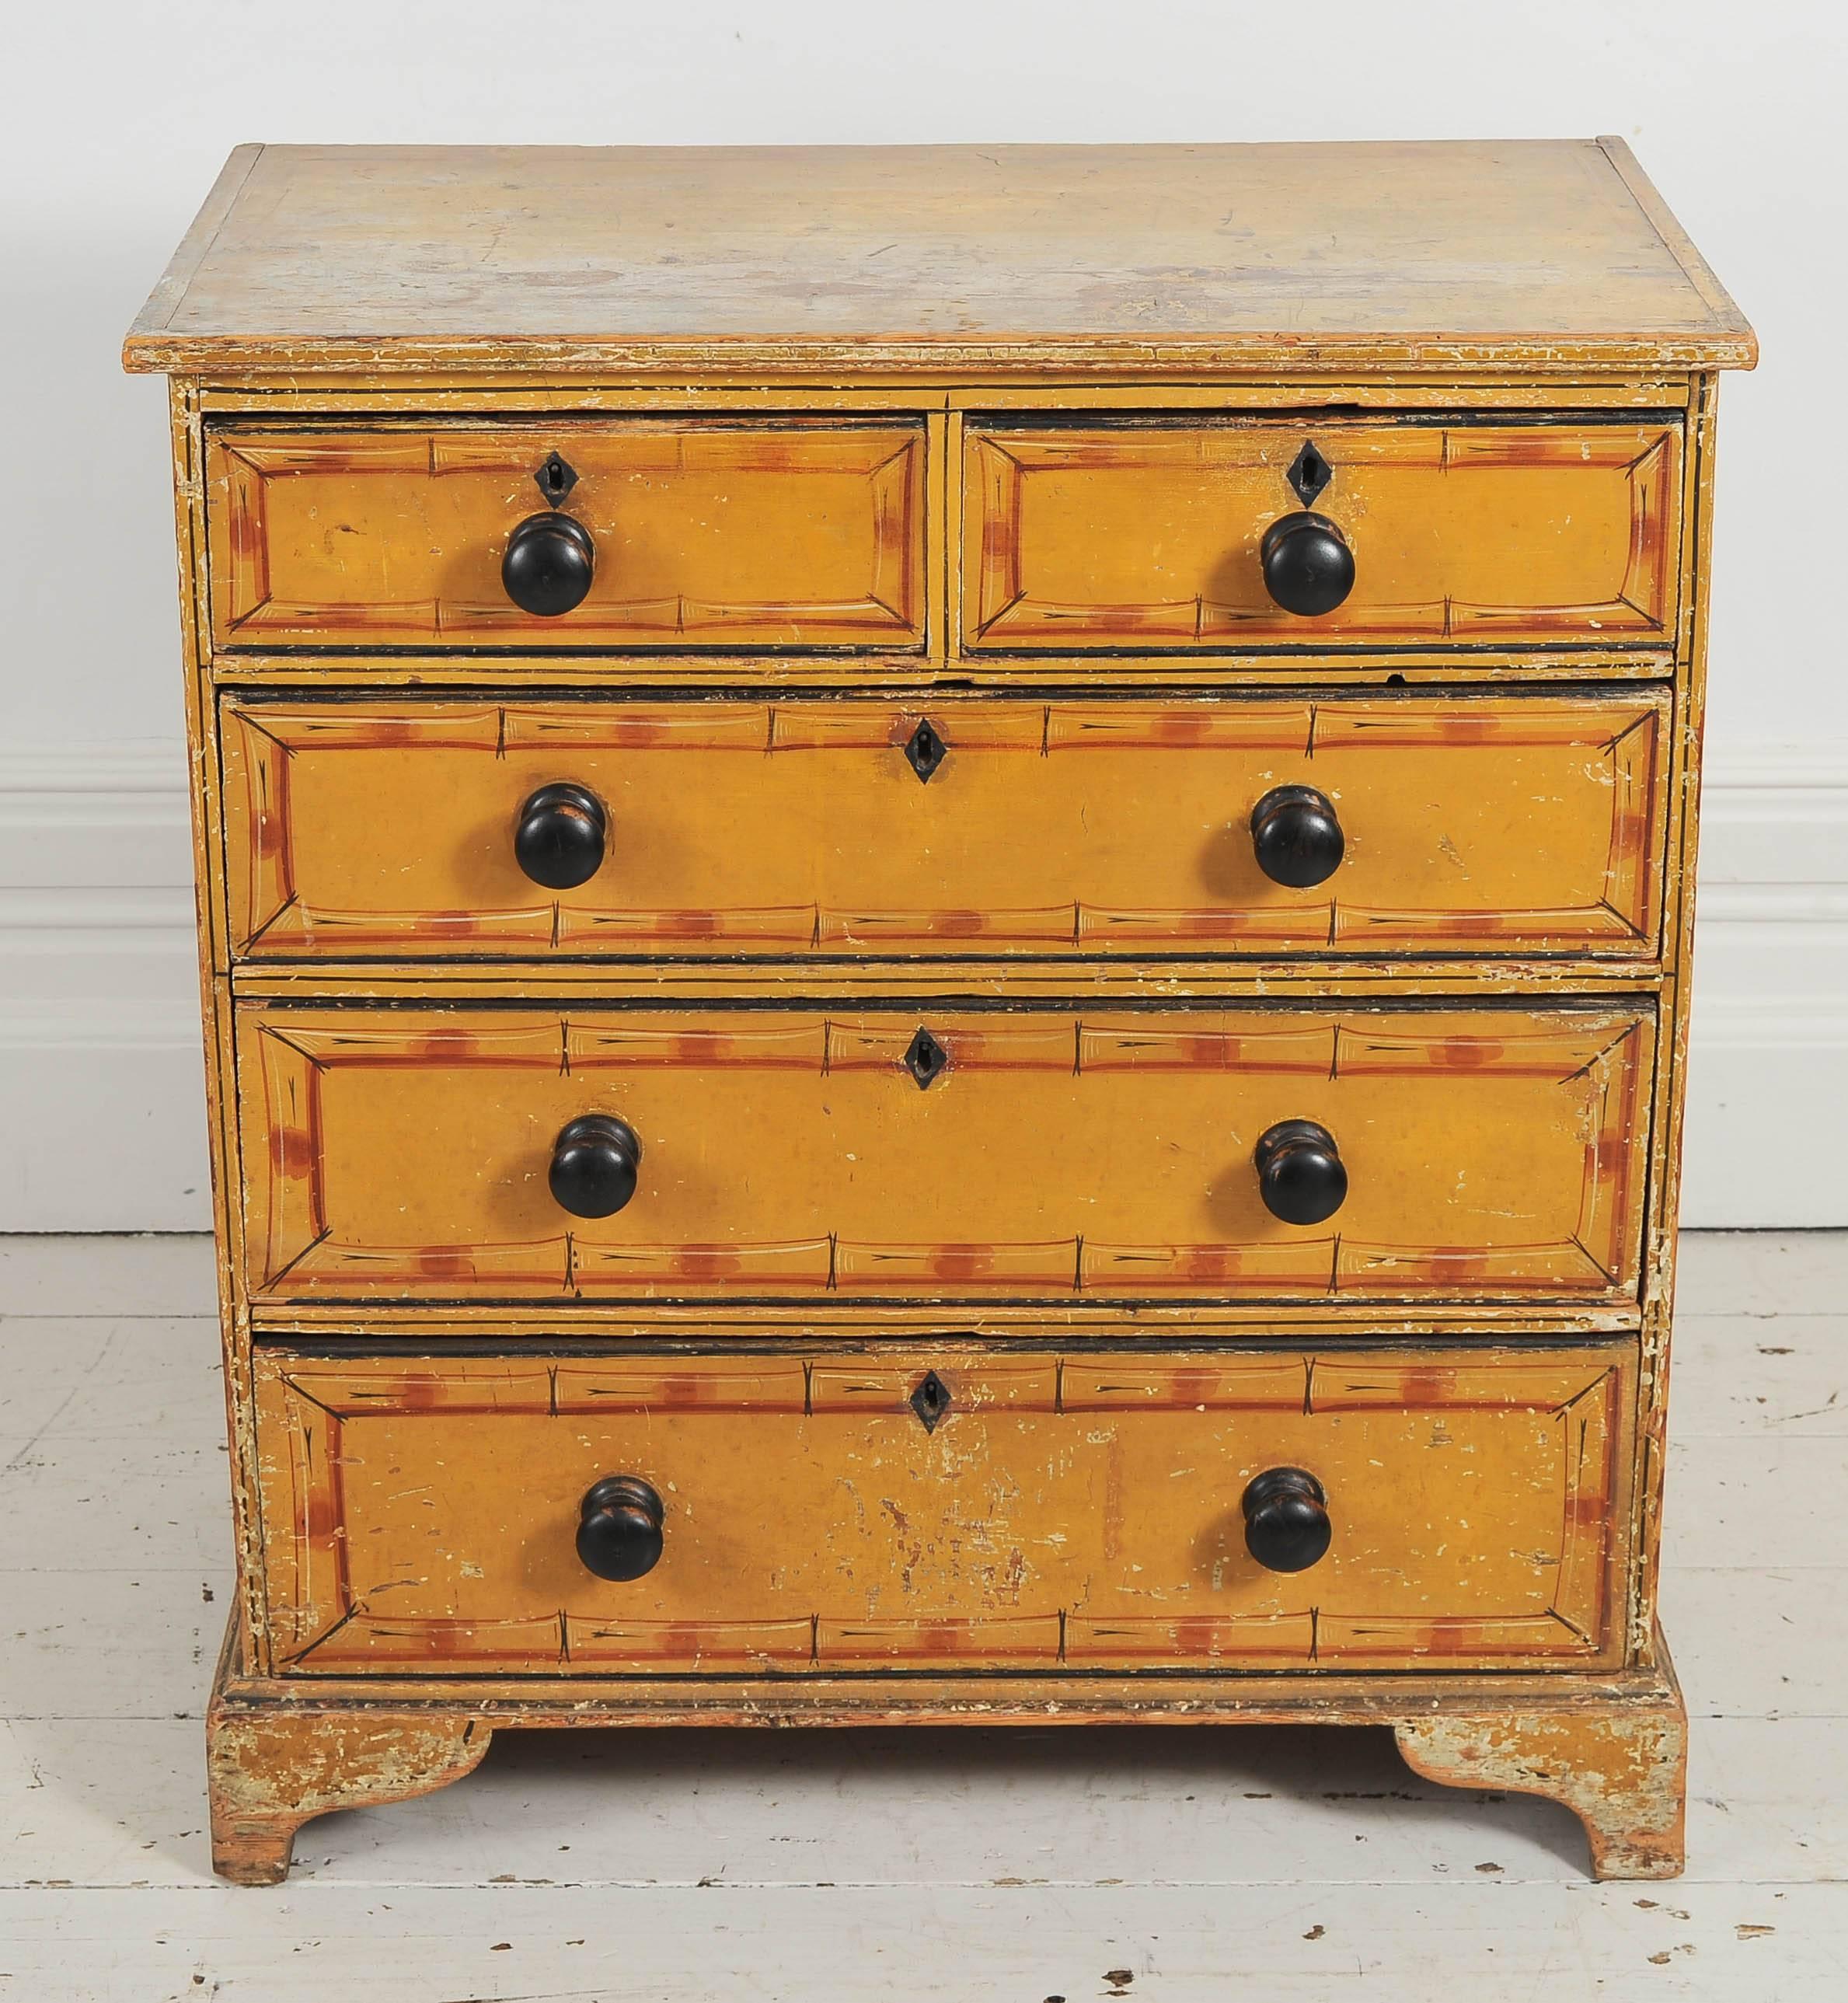 This little chest of drawers is utterly charming as well as being much sought after for it's small size. But what makes it really special is the original painted faux bamboo decoration which frames the drawers, sides and top. This is in it's